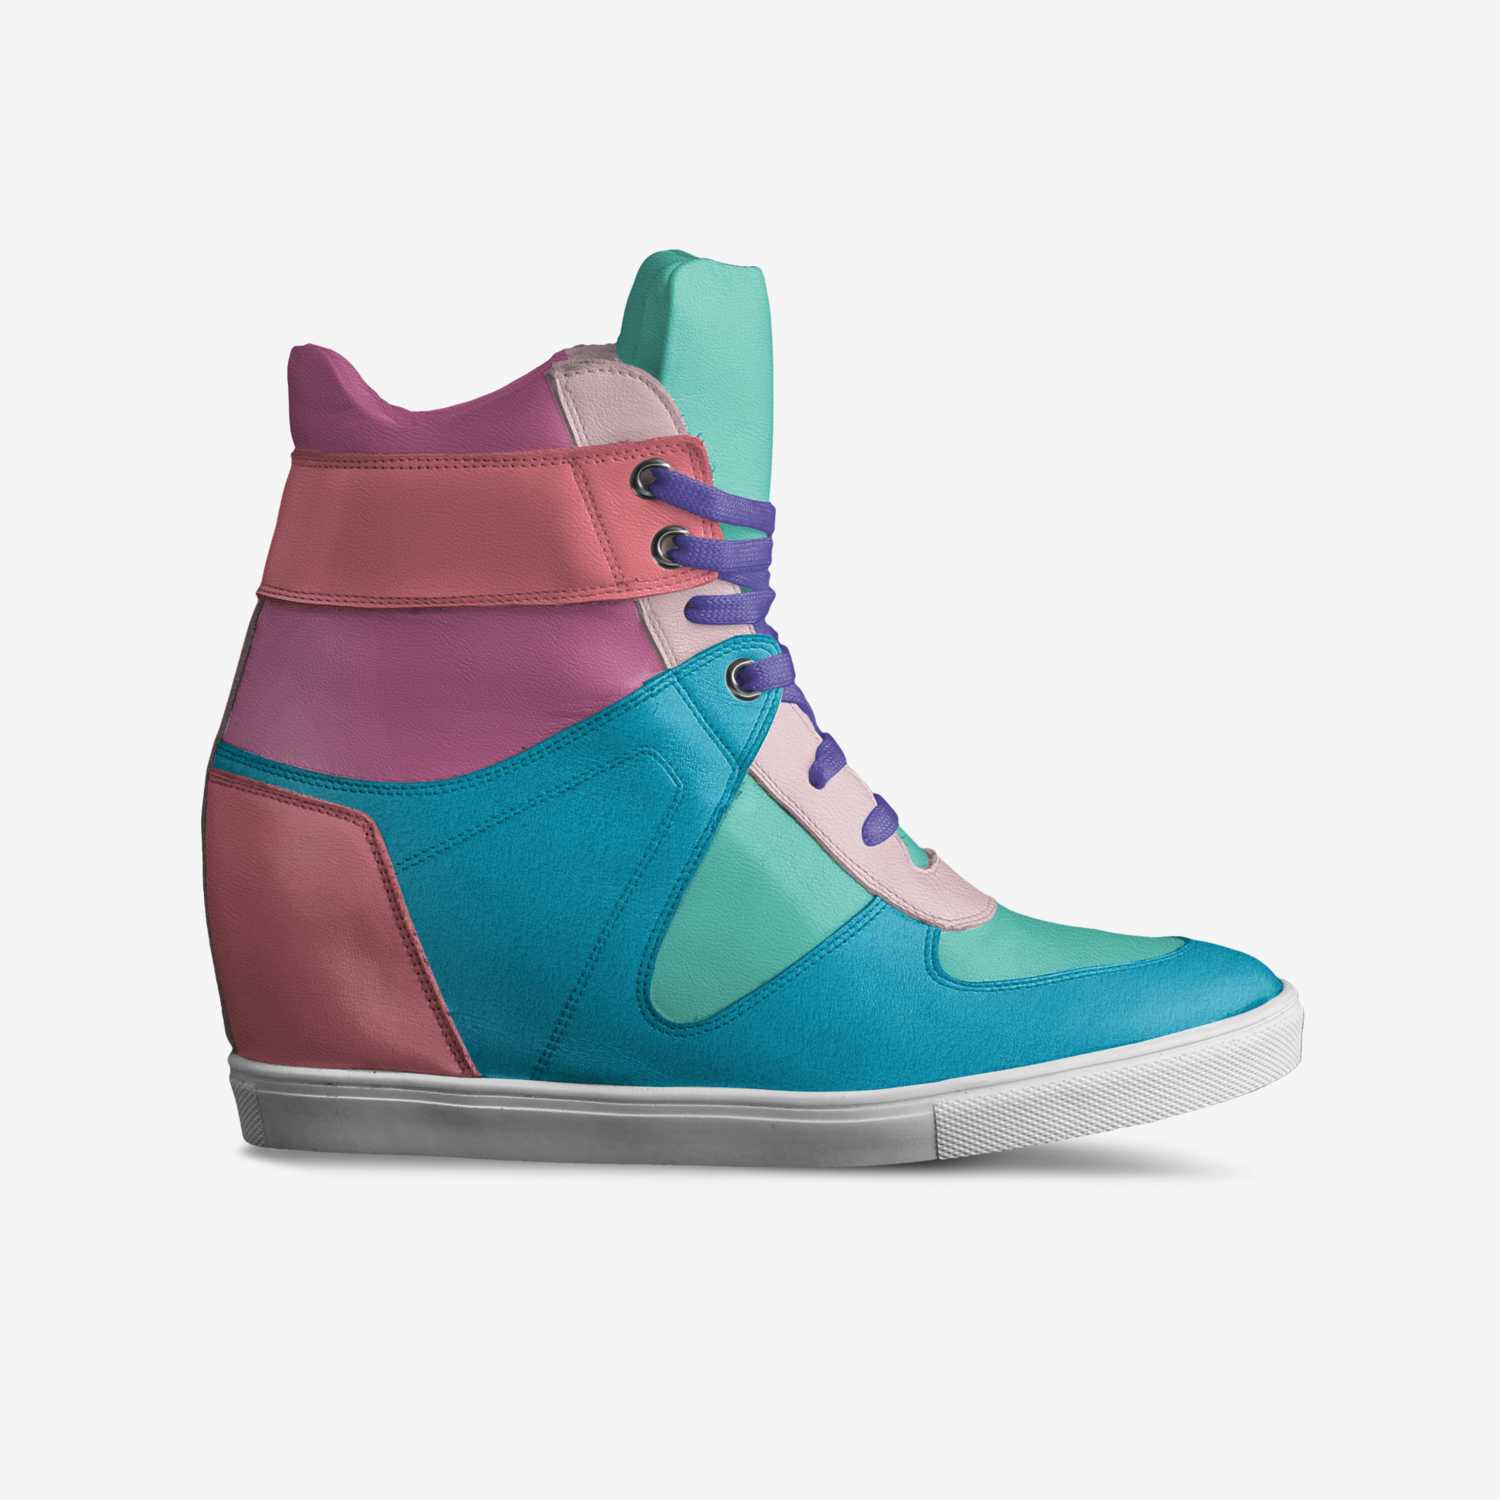 Cool A Custom Shoe Concept By Hhshd